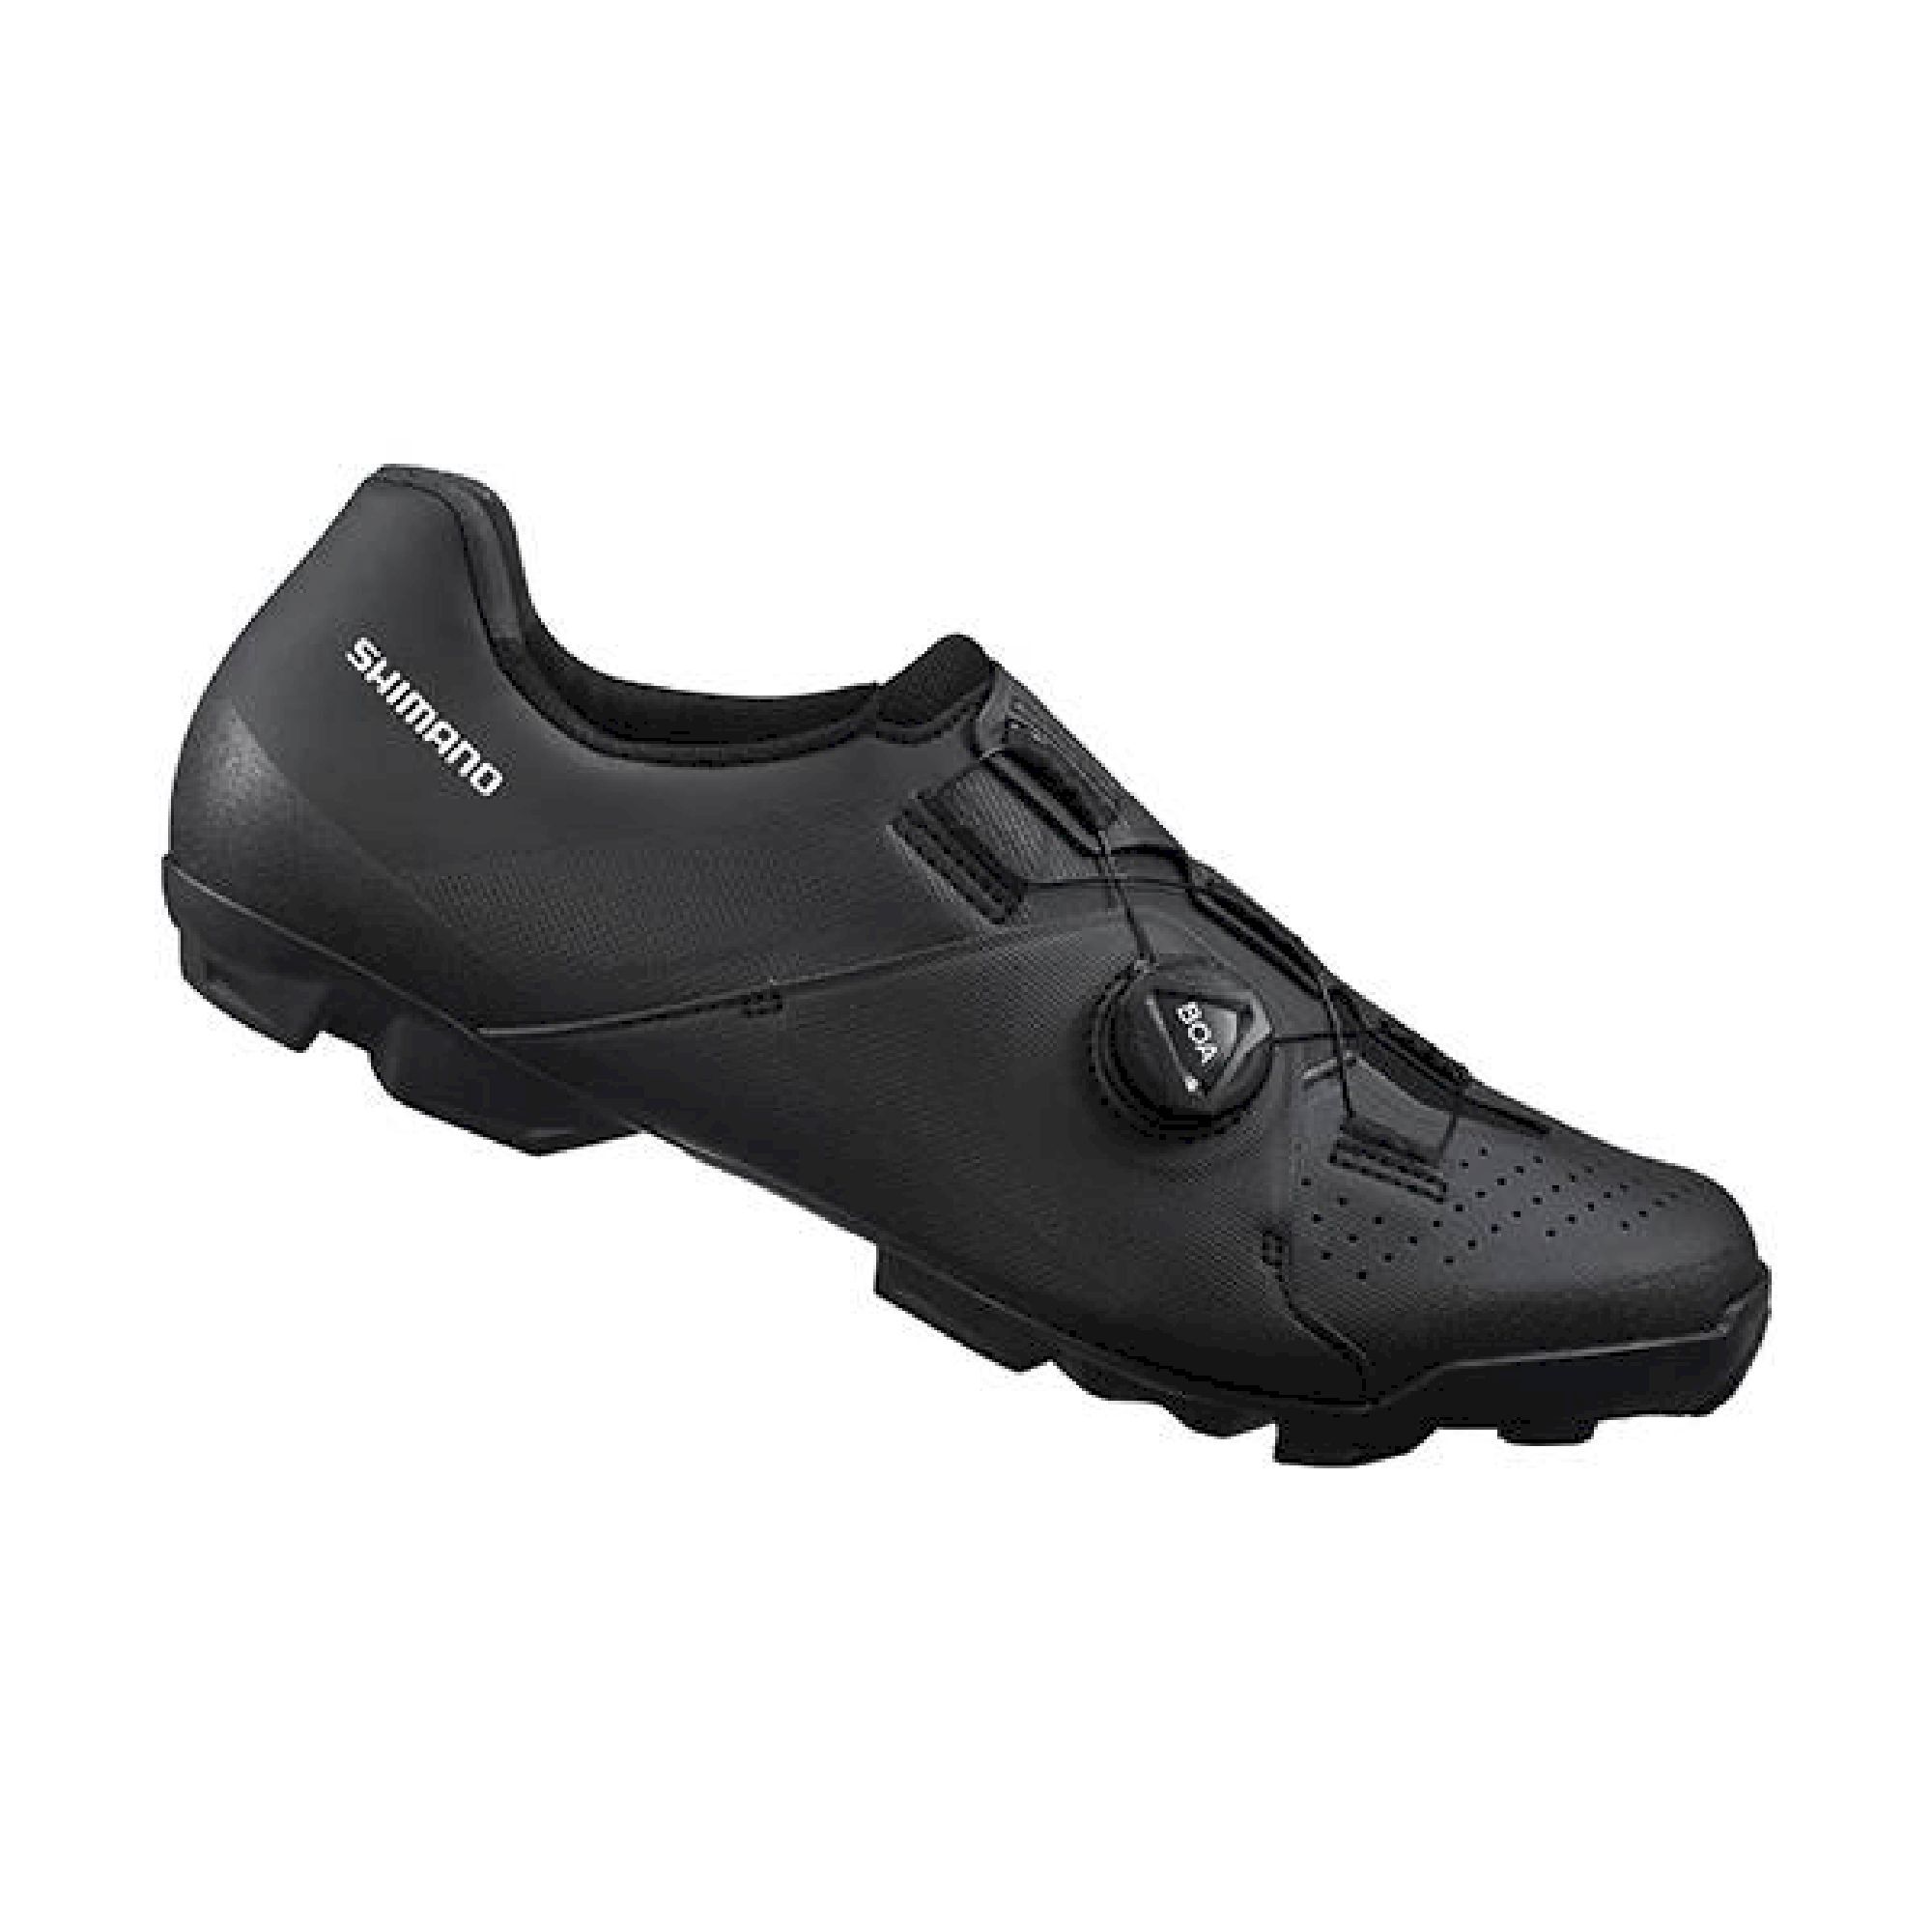 Shimano XC300 Large - Chaussures VTT homme